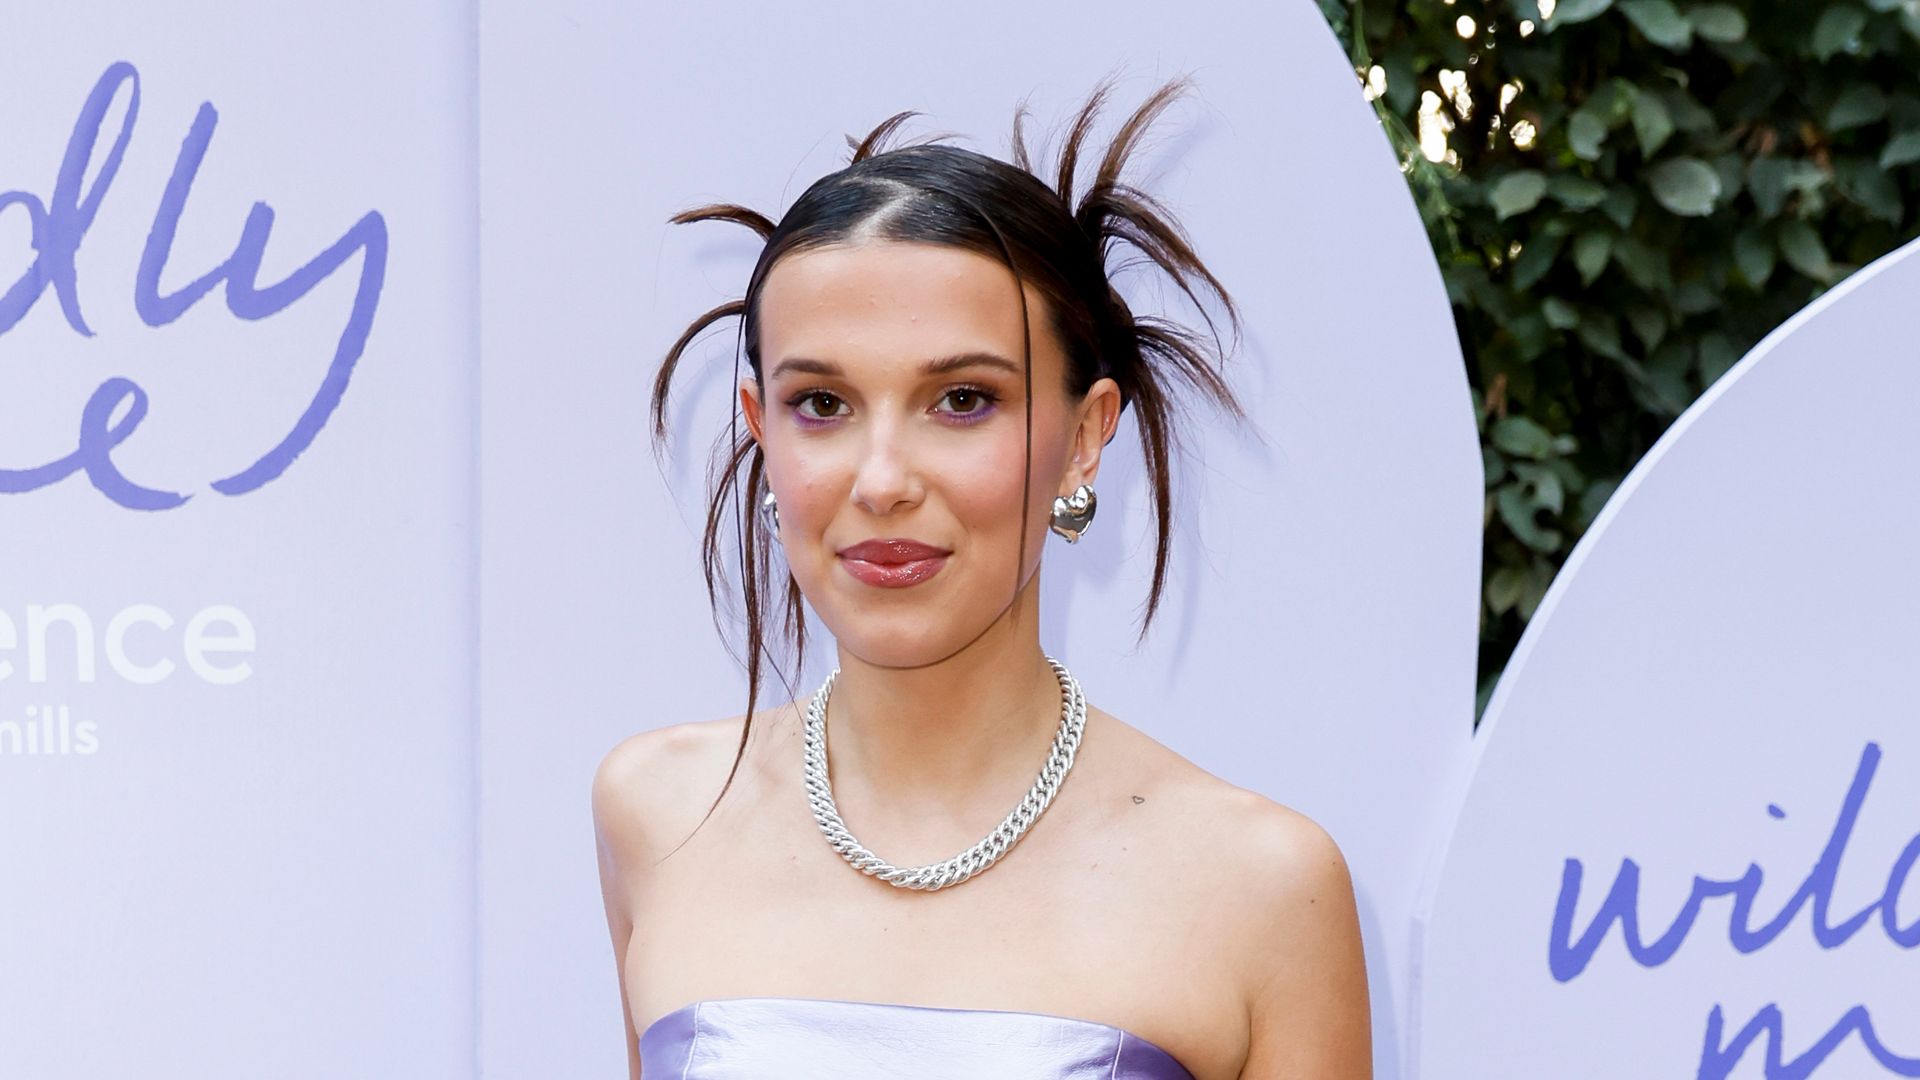 Millie Bobby Brown's Best Fashion and Dress Moments